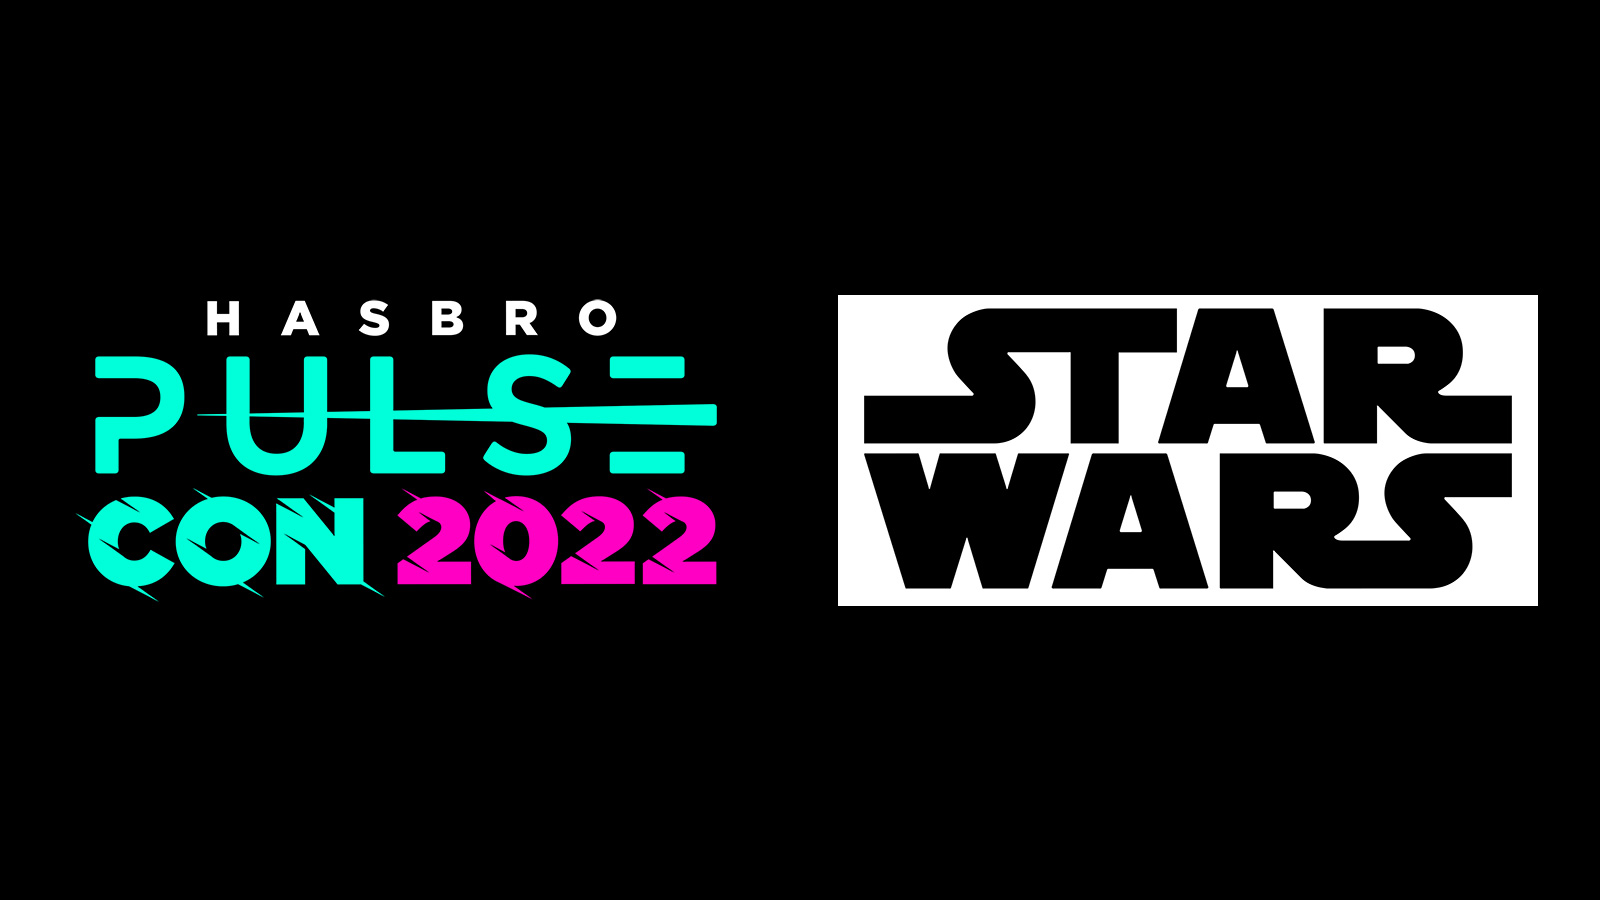 Preorder At Entertainment Earth And Amazon - New Hasbro Pulse Con 2022 Star Wars Reveals